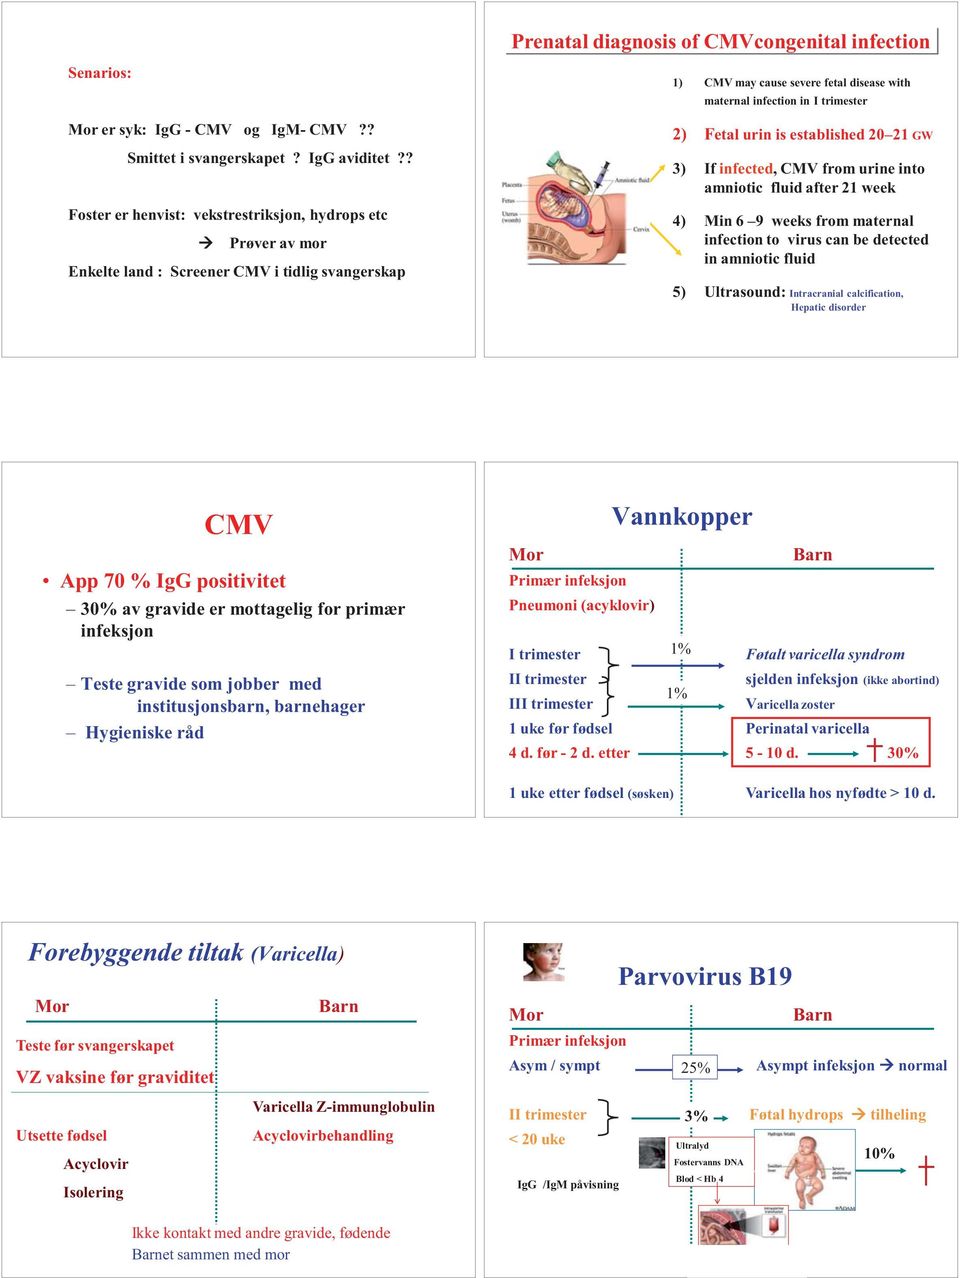 21 23 weeks gestation 1) CMV may cause severe fetal disease with maternal infection in I trimester 2) Fetal urin is established 20 21 GW 3) If infected, CMV from urine into amniotic fluid after 21